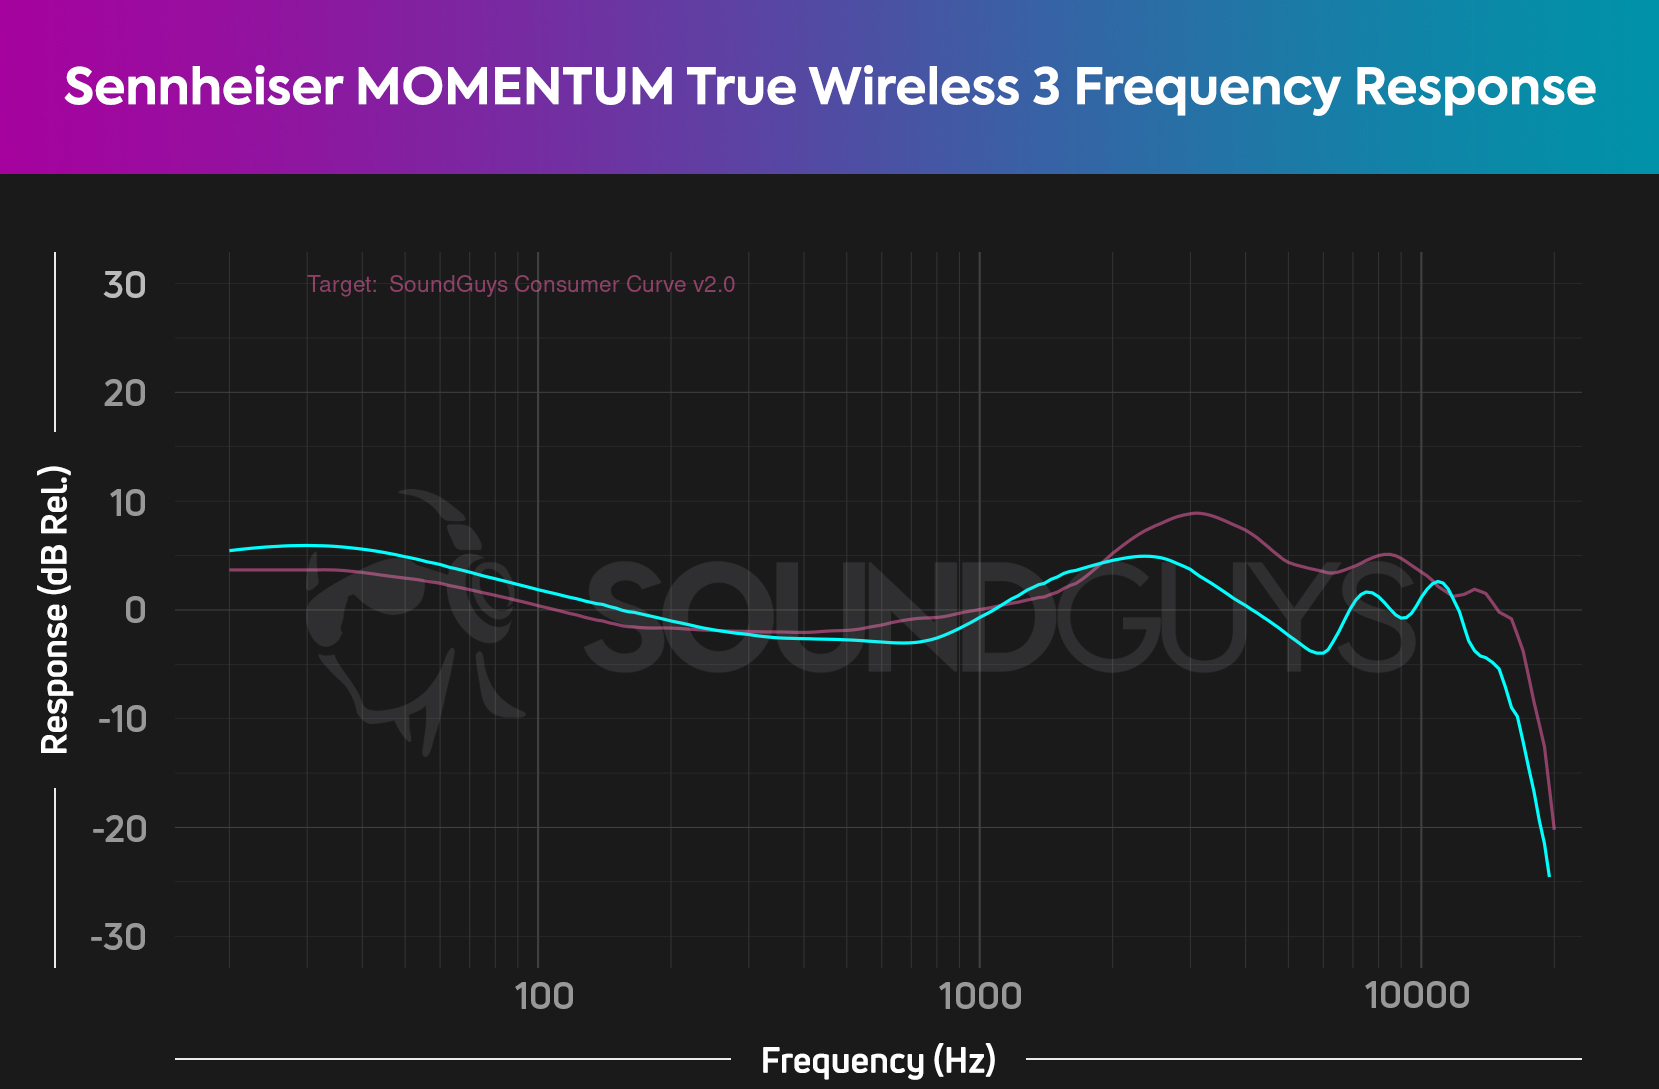 This frequency response chart compares the Sennheiser MOMENTUM True Wireless 3 to our ideal frequency response.